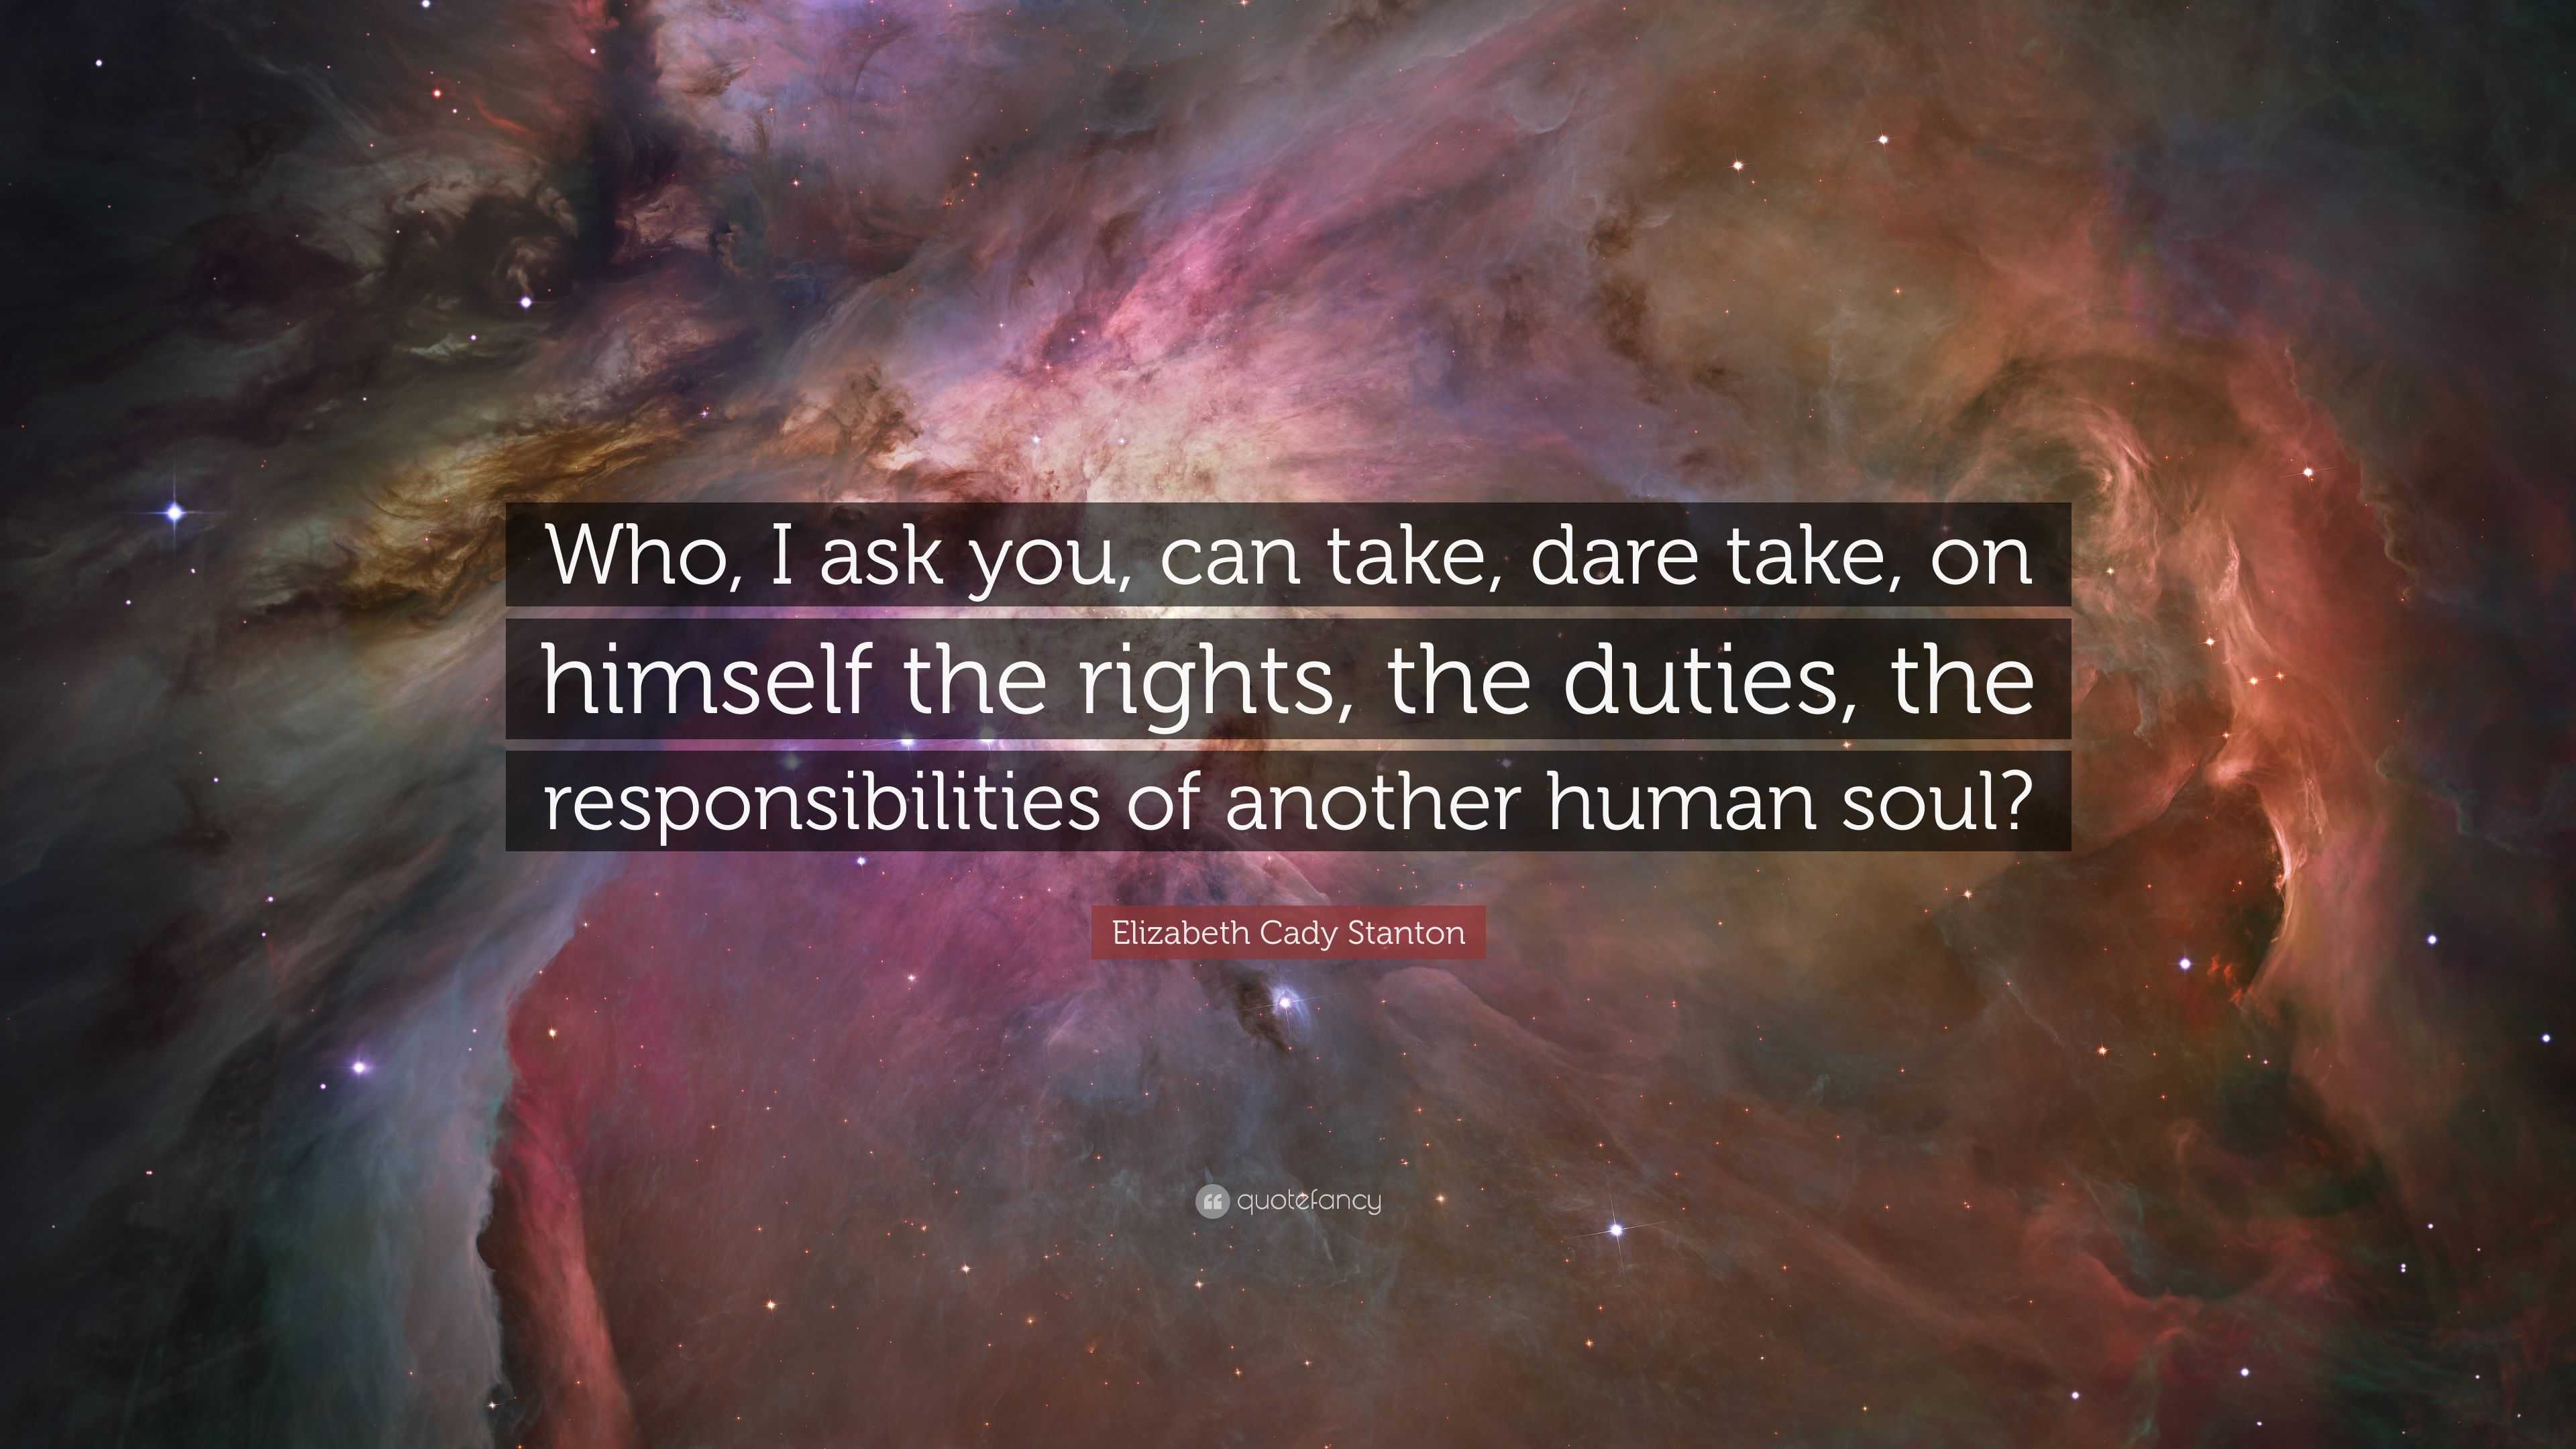 Elizabeth Cady Stanton Quote “who I Ask You Can Take Dare Take On 